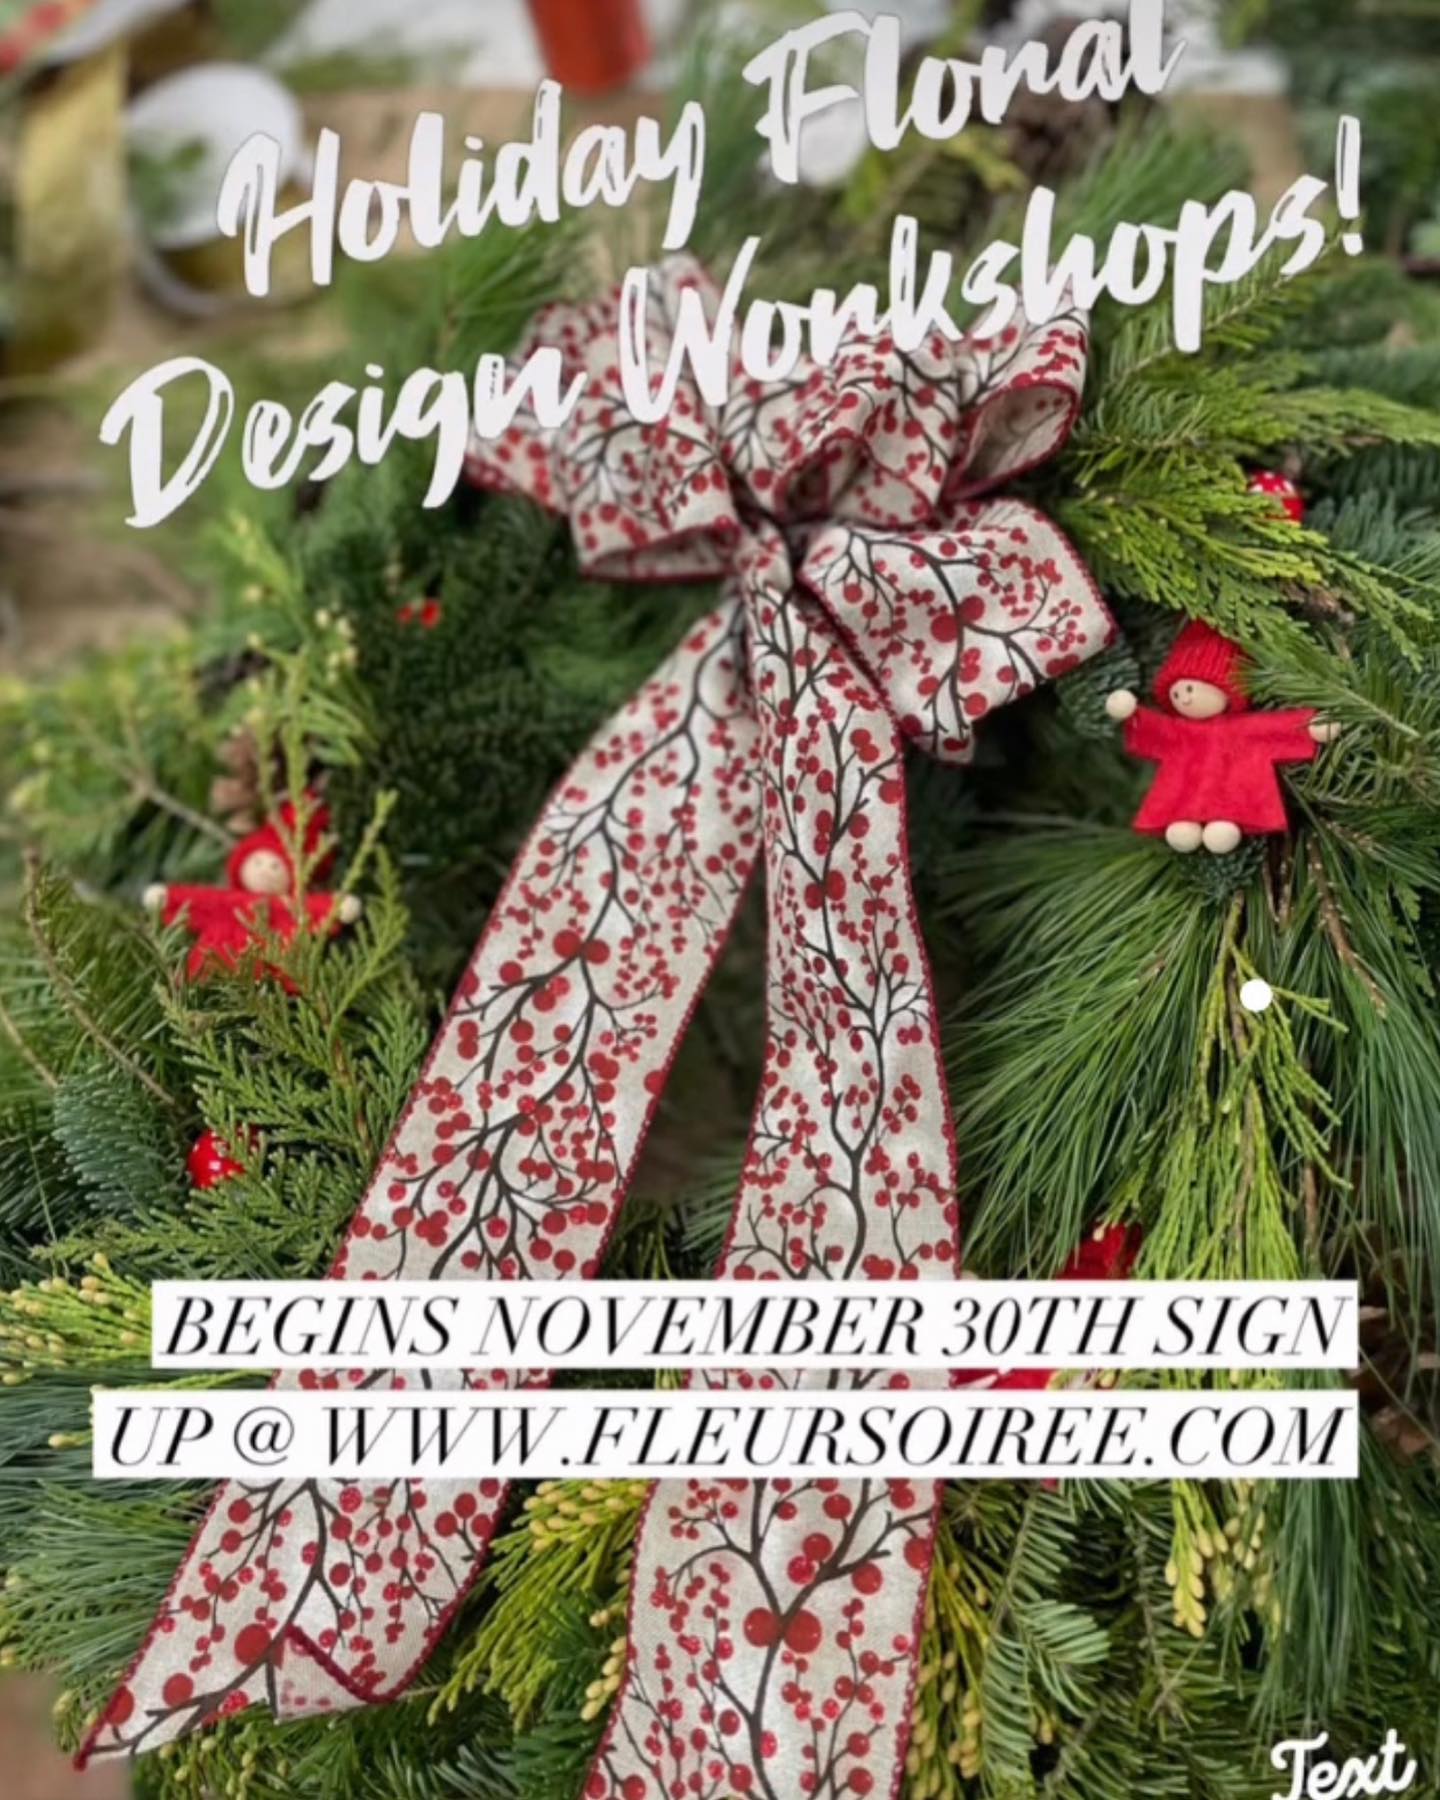 It’s that time of year again!!
Don’t miss this fun and creative workshop before it books up!
Register @ www.fleursoiree.com
#newportholidayworkshops#holidayworkshops#holidayworkshops2022 #holidaywreathclasses